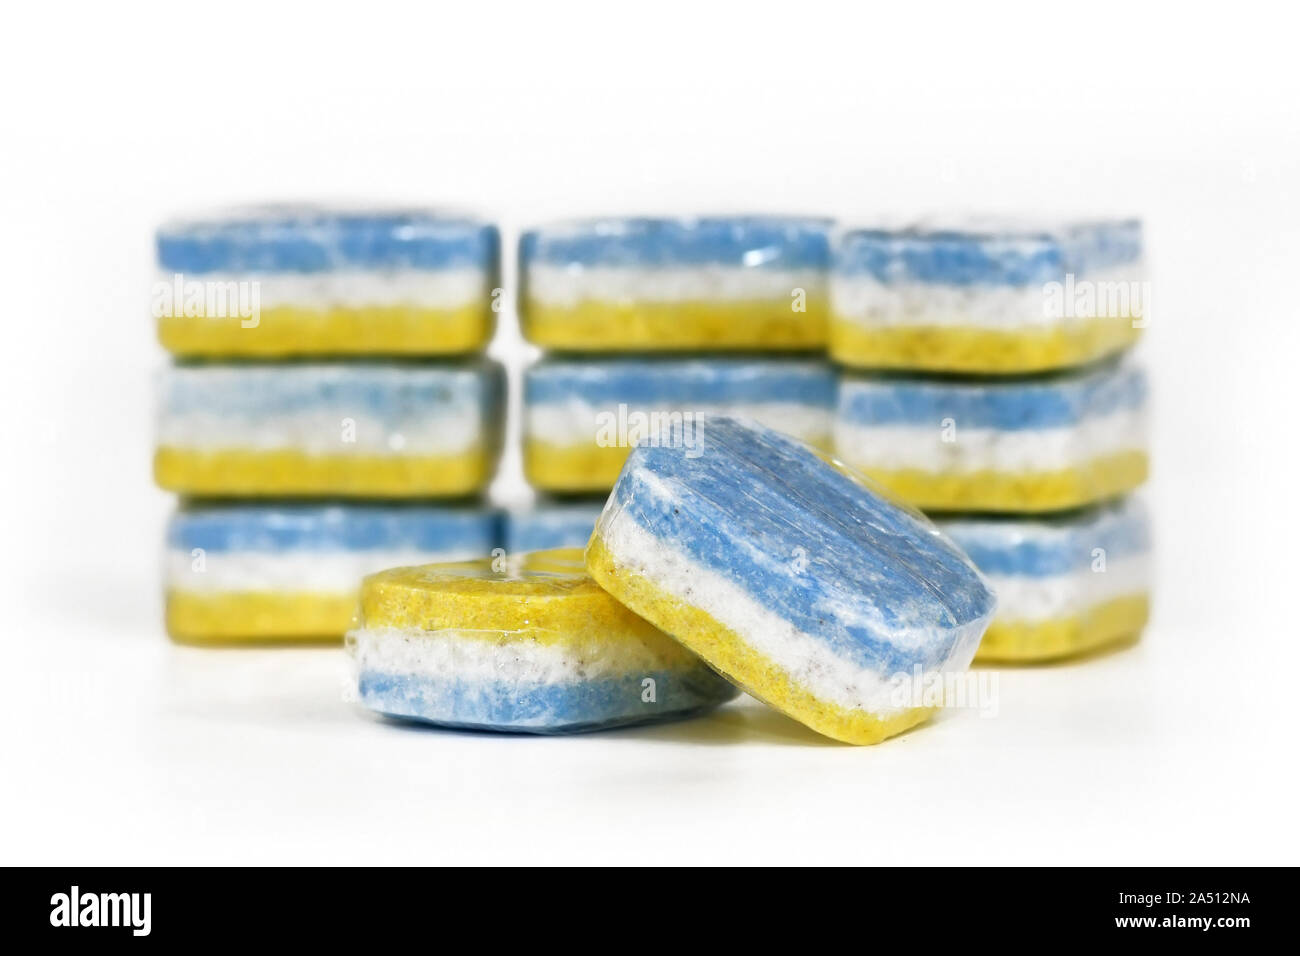 Three-colored blue, white and yellow dishwasher cleaning tabs in self-dissolving foil on white background Stock Photo